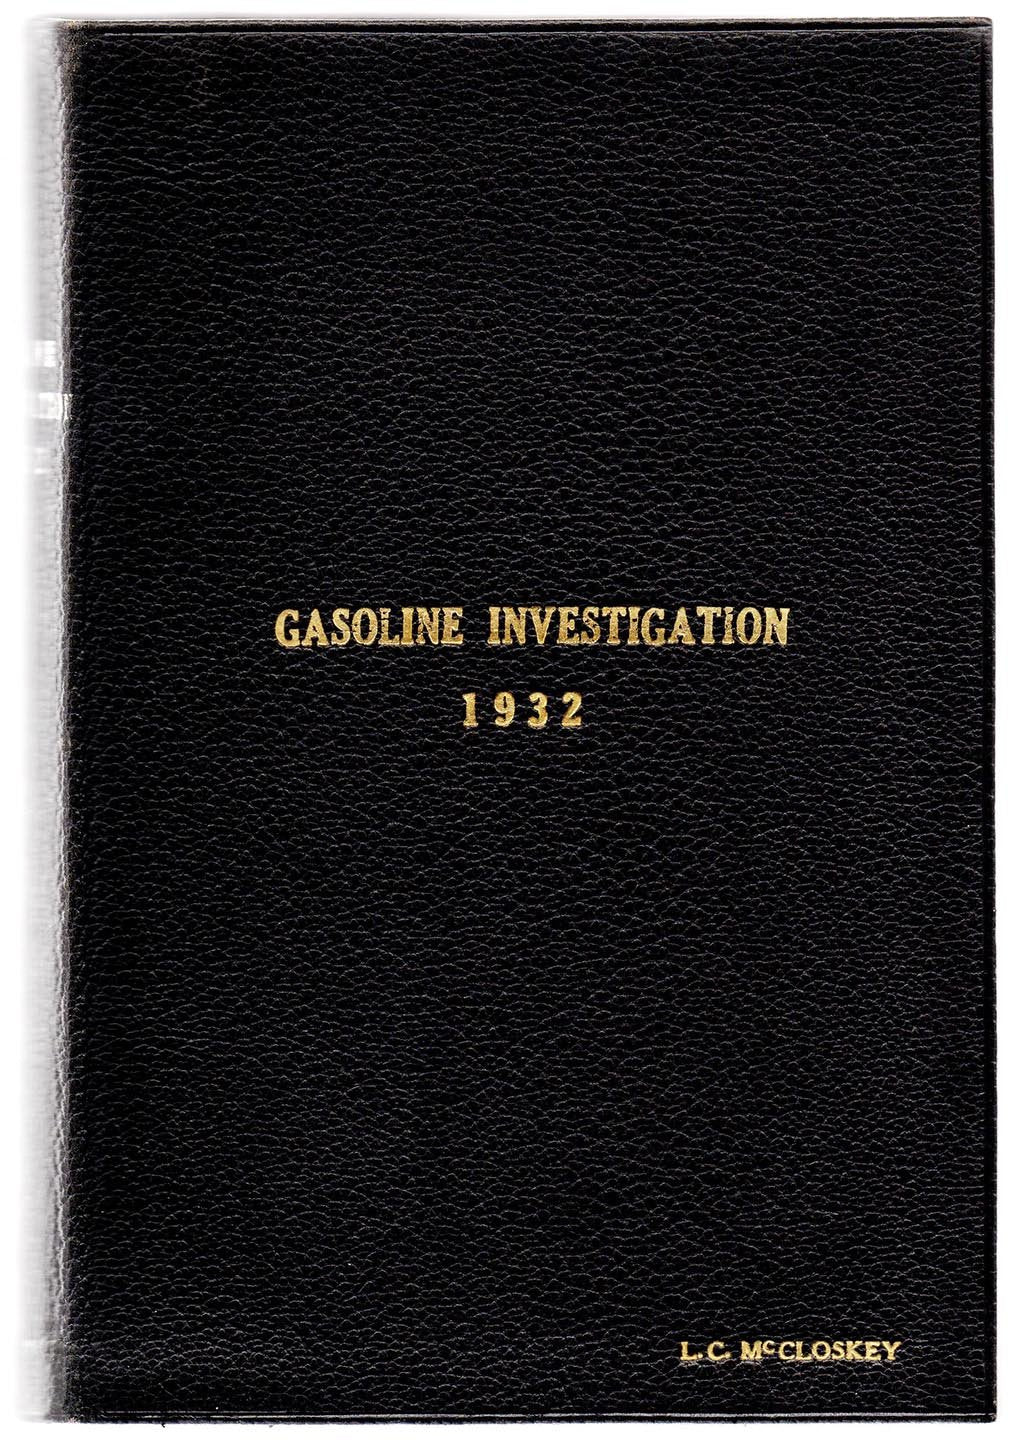 Select Standing Committee on Banking and Commerce: Minutes of Proceedings and Evidence: Reference, Price of Gasoline